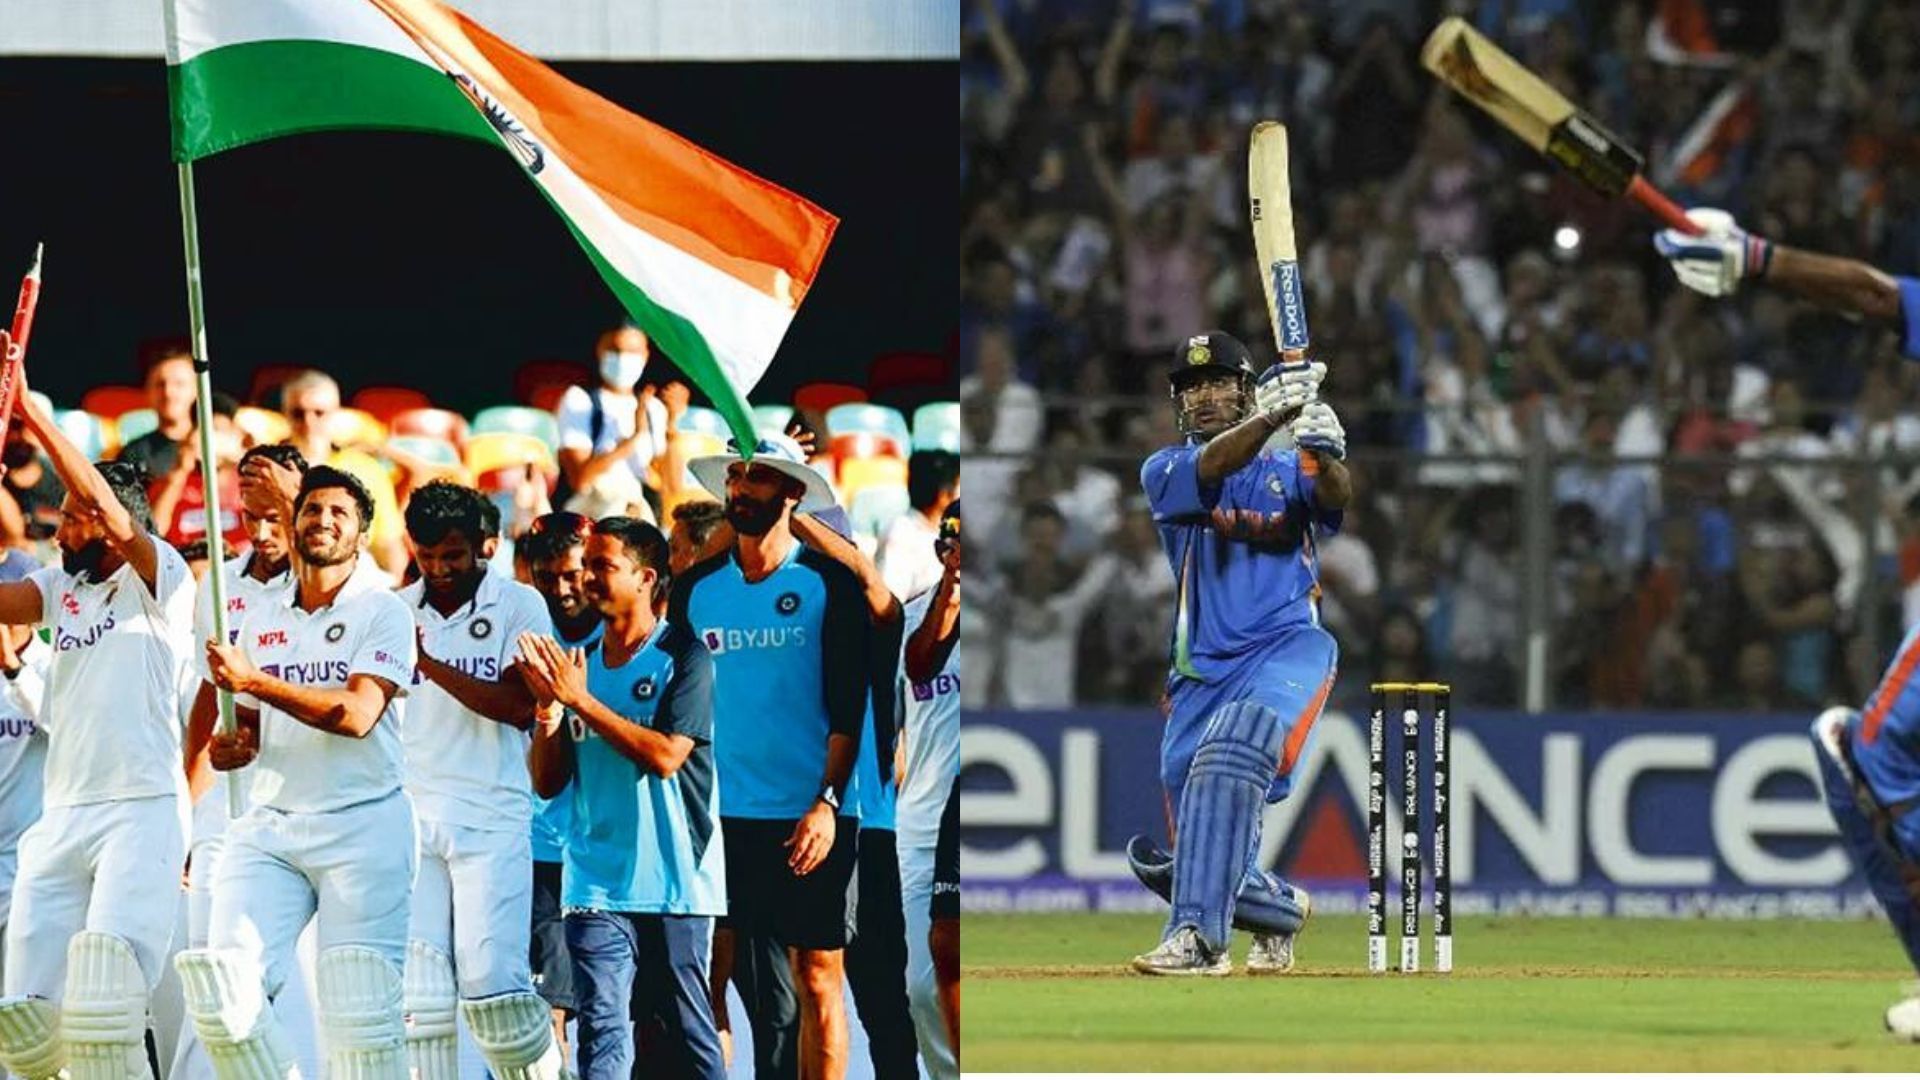 Some iconic moments that fans of Indian cricket will never forget. (P.C.:Twitter)